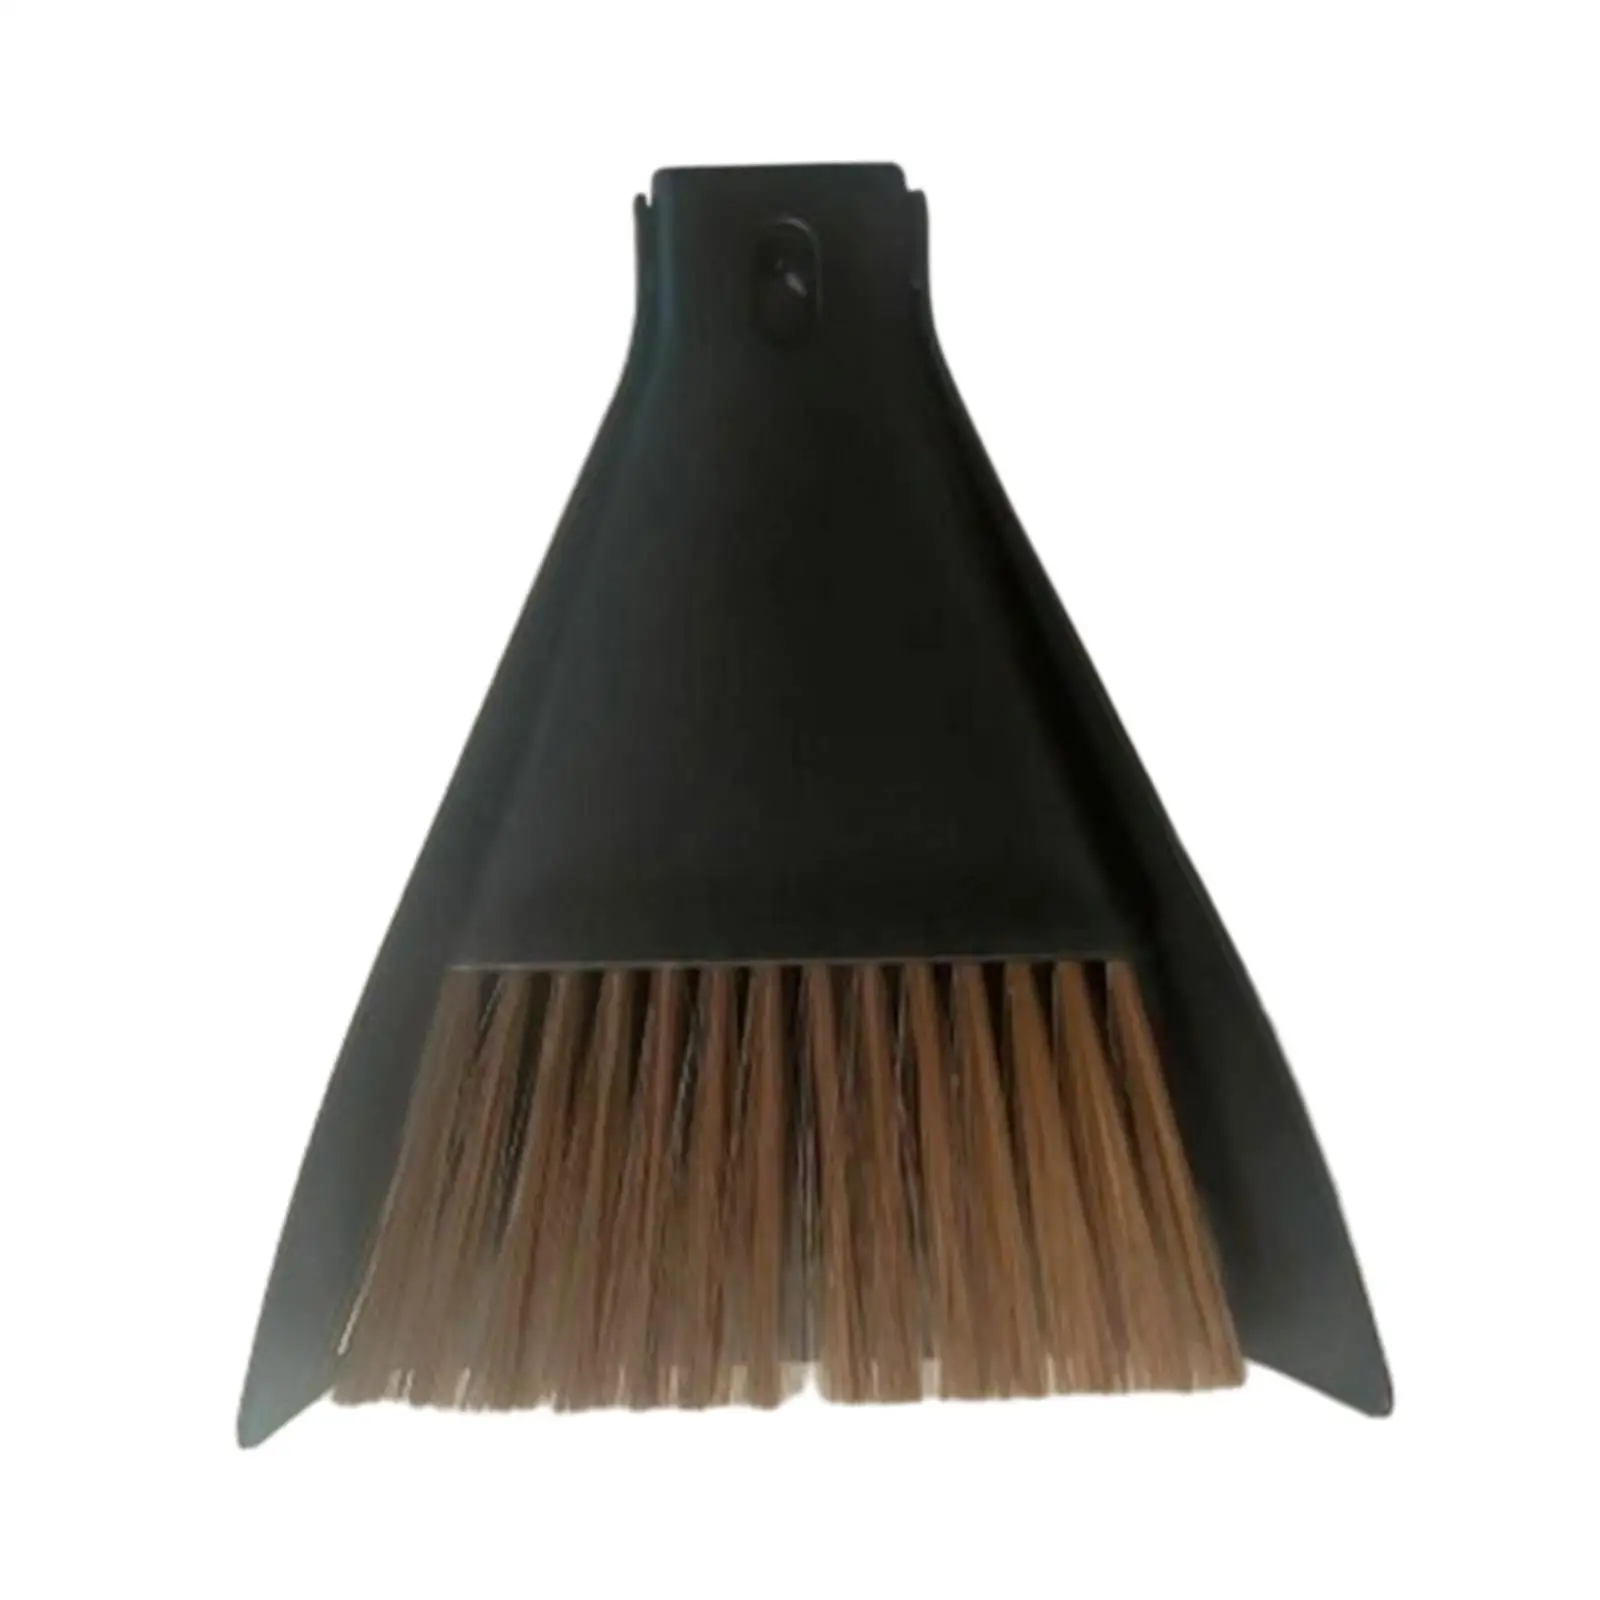 Small Broom and Dustpan Set Dust Pan Cleaning Tools Table Cleaning Brush Sweeping Broom for Desk Table Office Keyboard Home